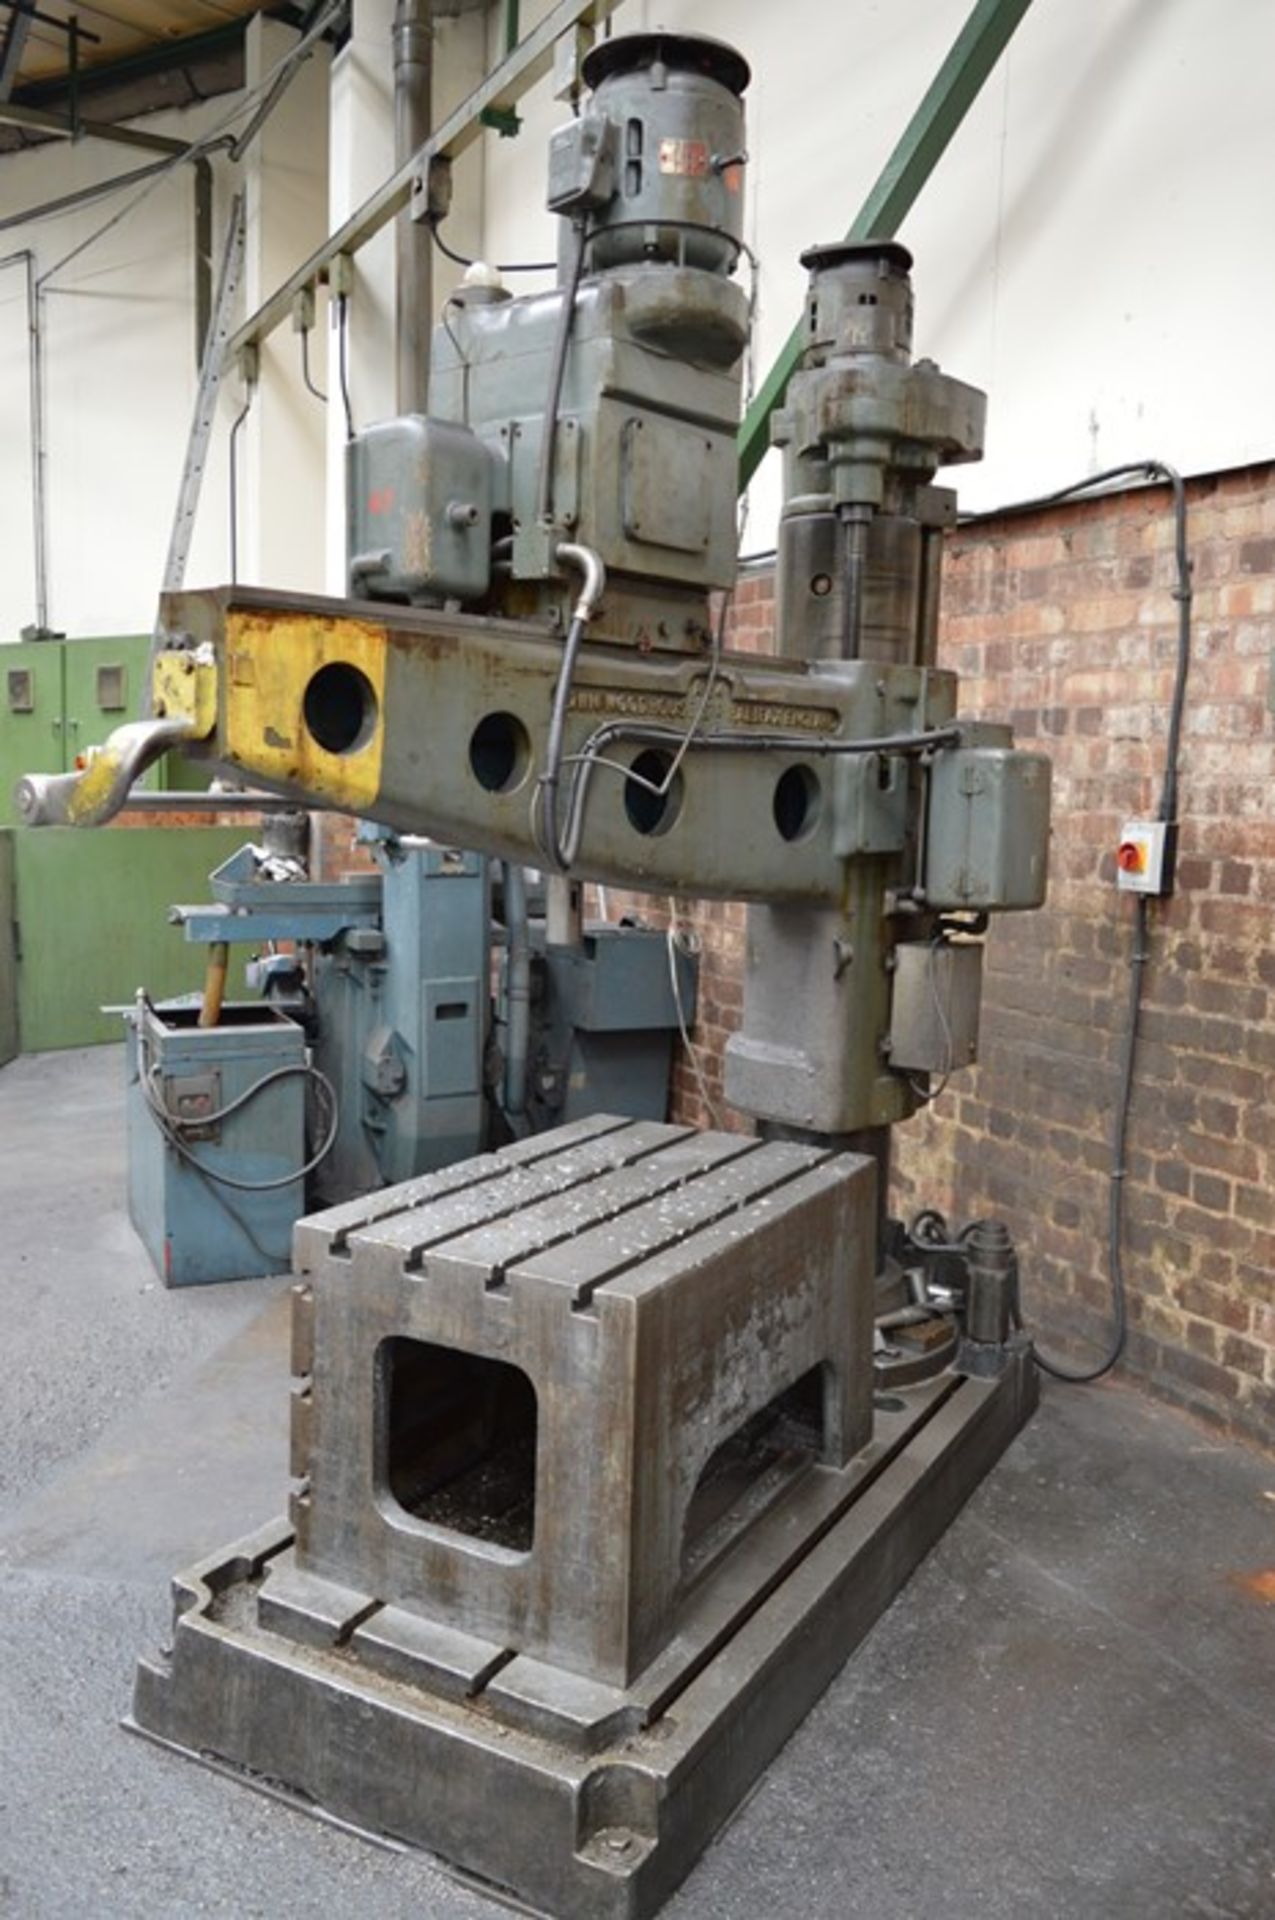 Town Woodhouse, AE4 radial arm drill, Machine No. 38998, bed size: 0.92m x 0.61m (Risk Assessment - Image 2 of 5